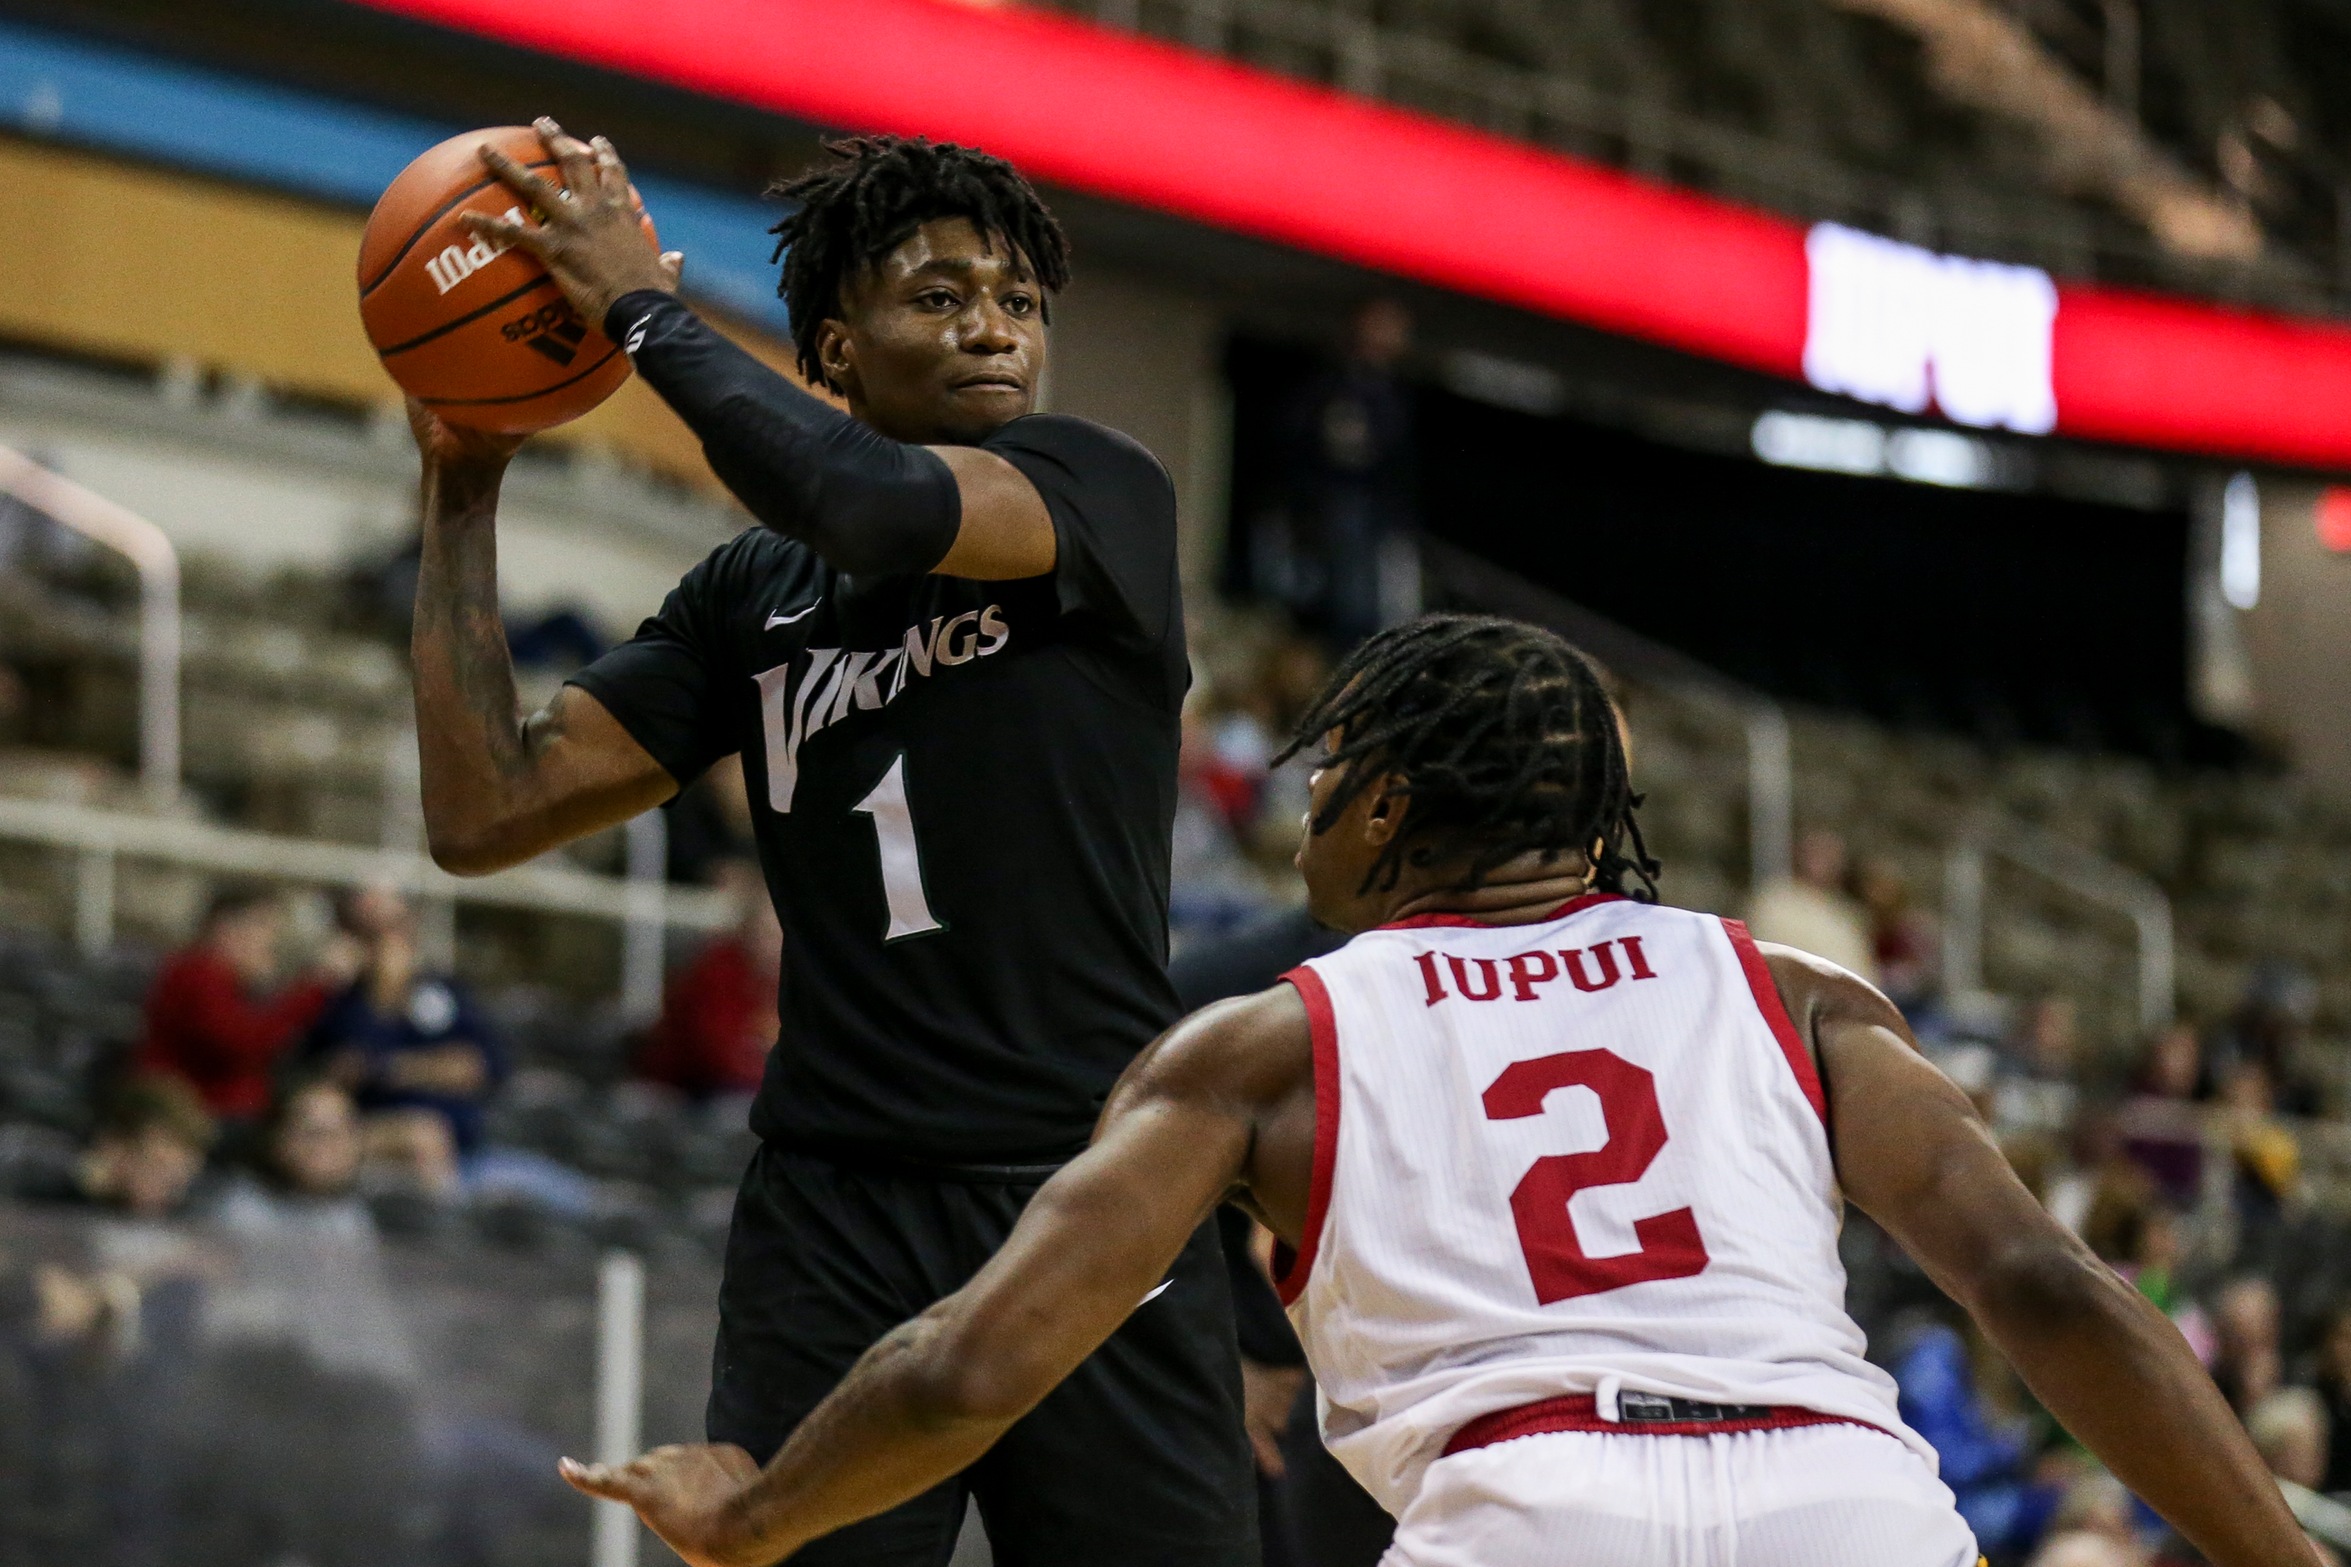 Vikings Start Fast, Finish Strong in Road Win Over IUPUI